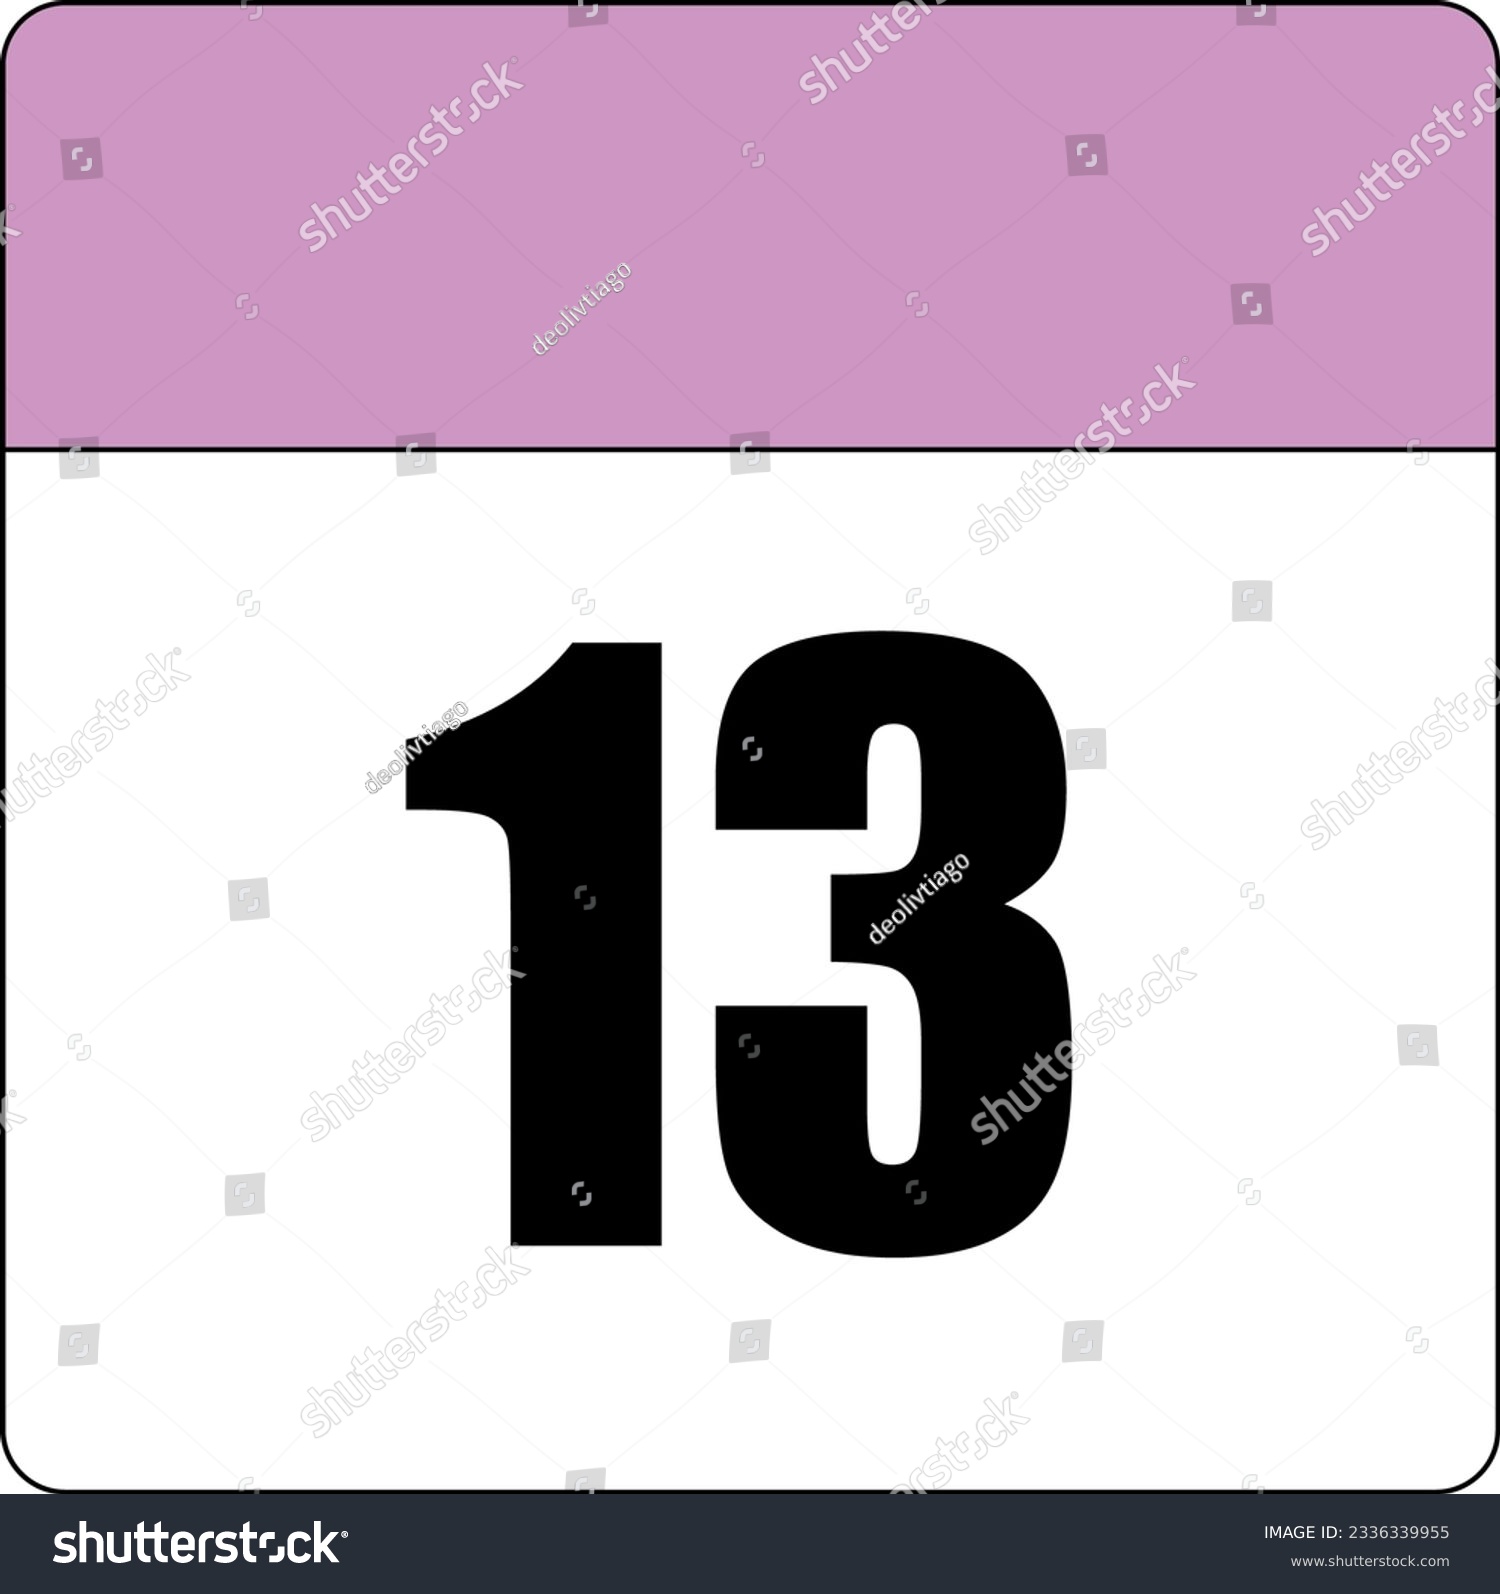 SVG of simple calendar icon with pink header and white background showing 13th day number thirteen svg